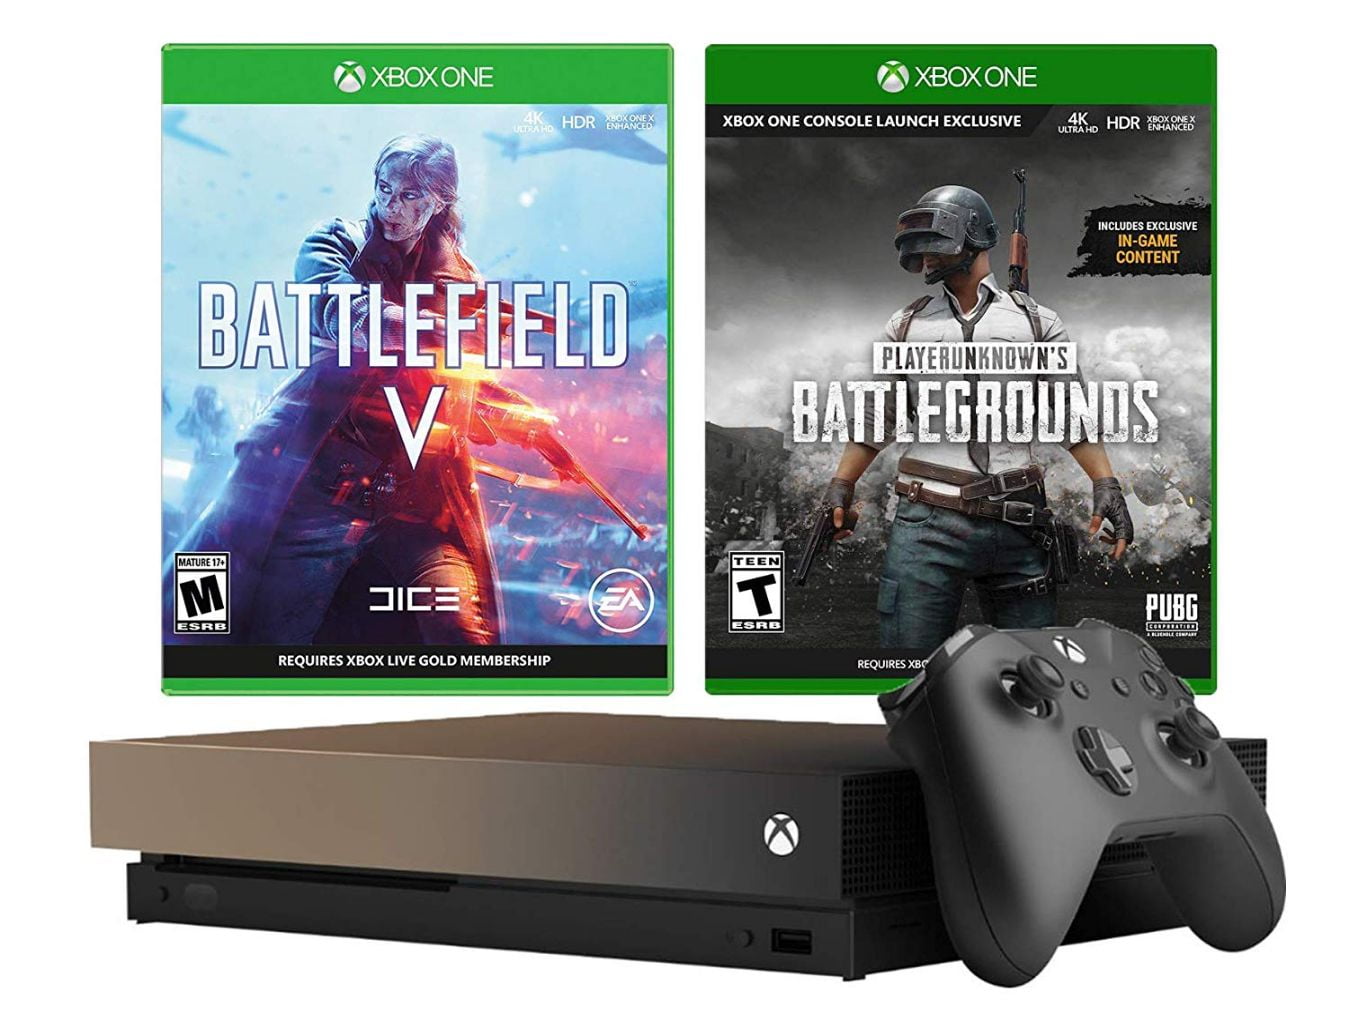 Het is de bedoeling dat diefstal autobiografie Xbox One X 1TB Gold Rush Battlefield V and PUBG Bundle: Battlefield V  Deluxe Edition, PlayerUnknown\'s Battlegrounds with 4K HDR 1TB Xbox One X  Gaming Console - Gray Gold - Walmart.com